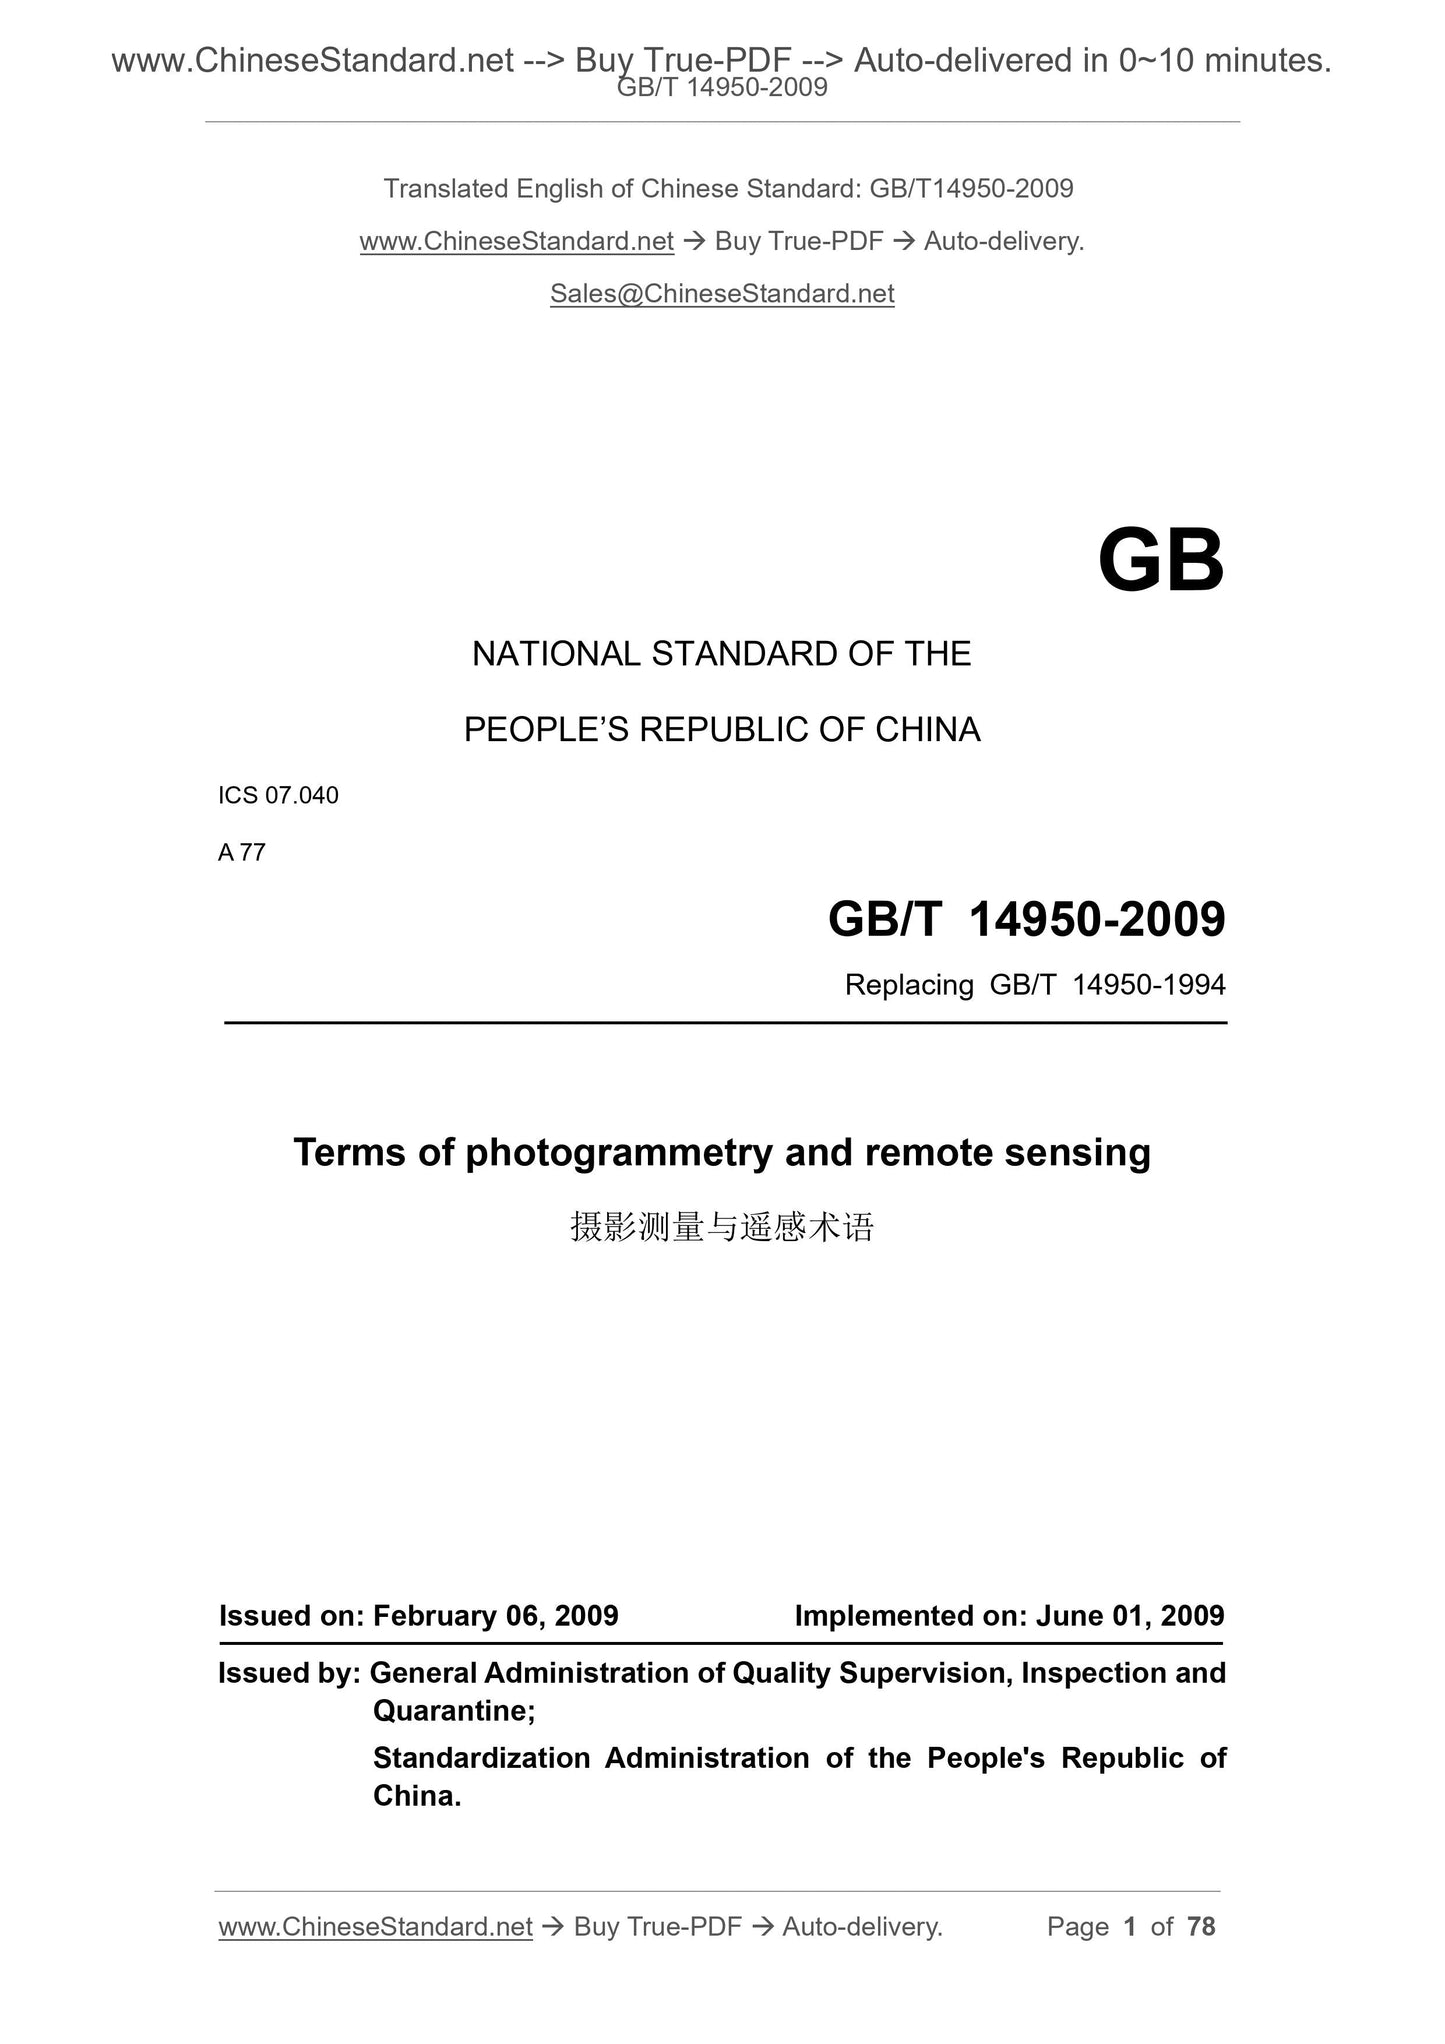 GB/T 14950-2009 Page 1